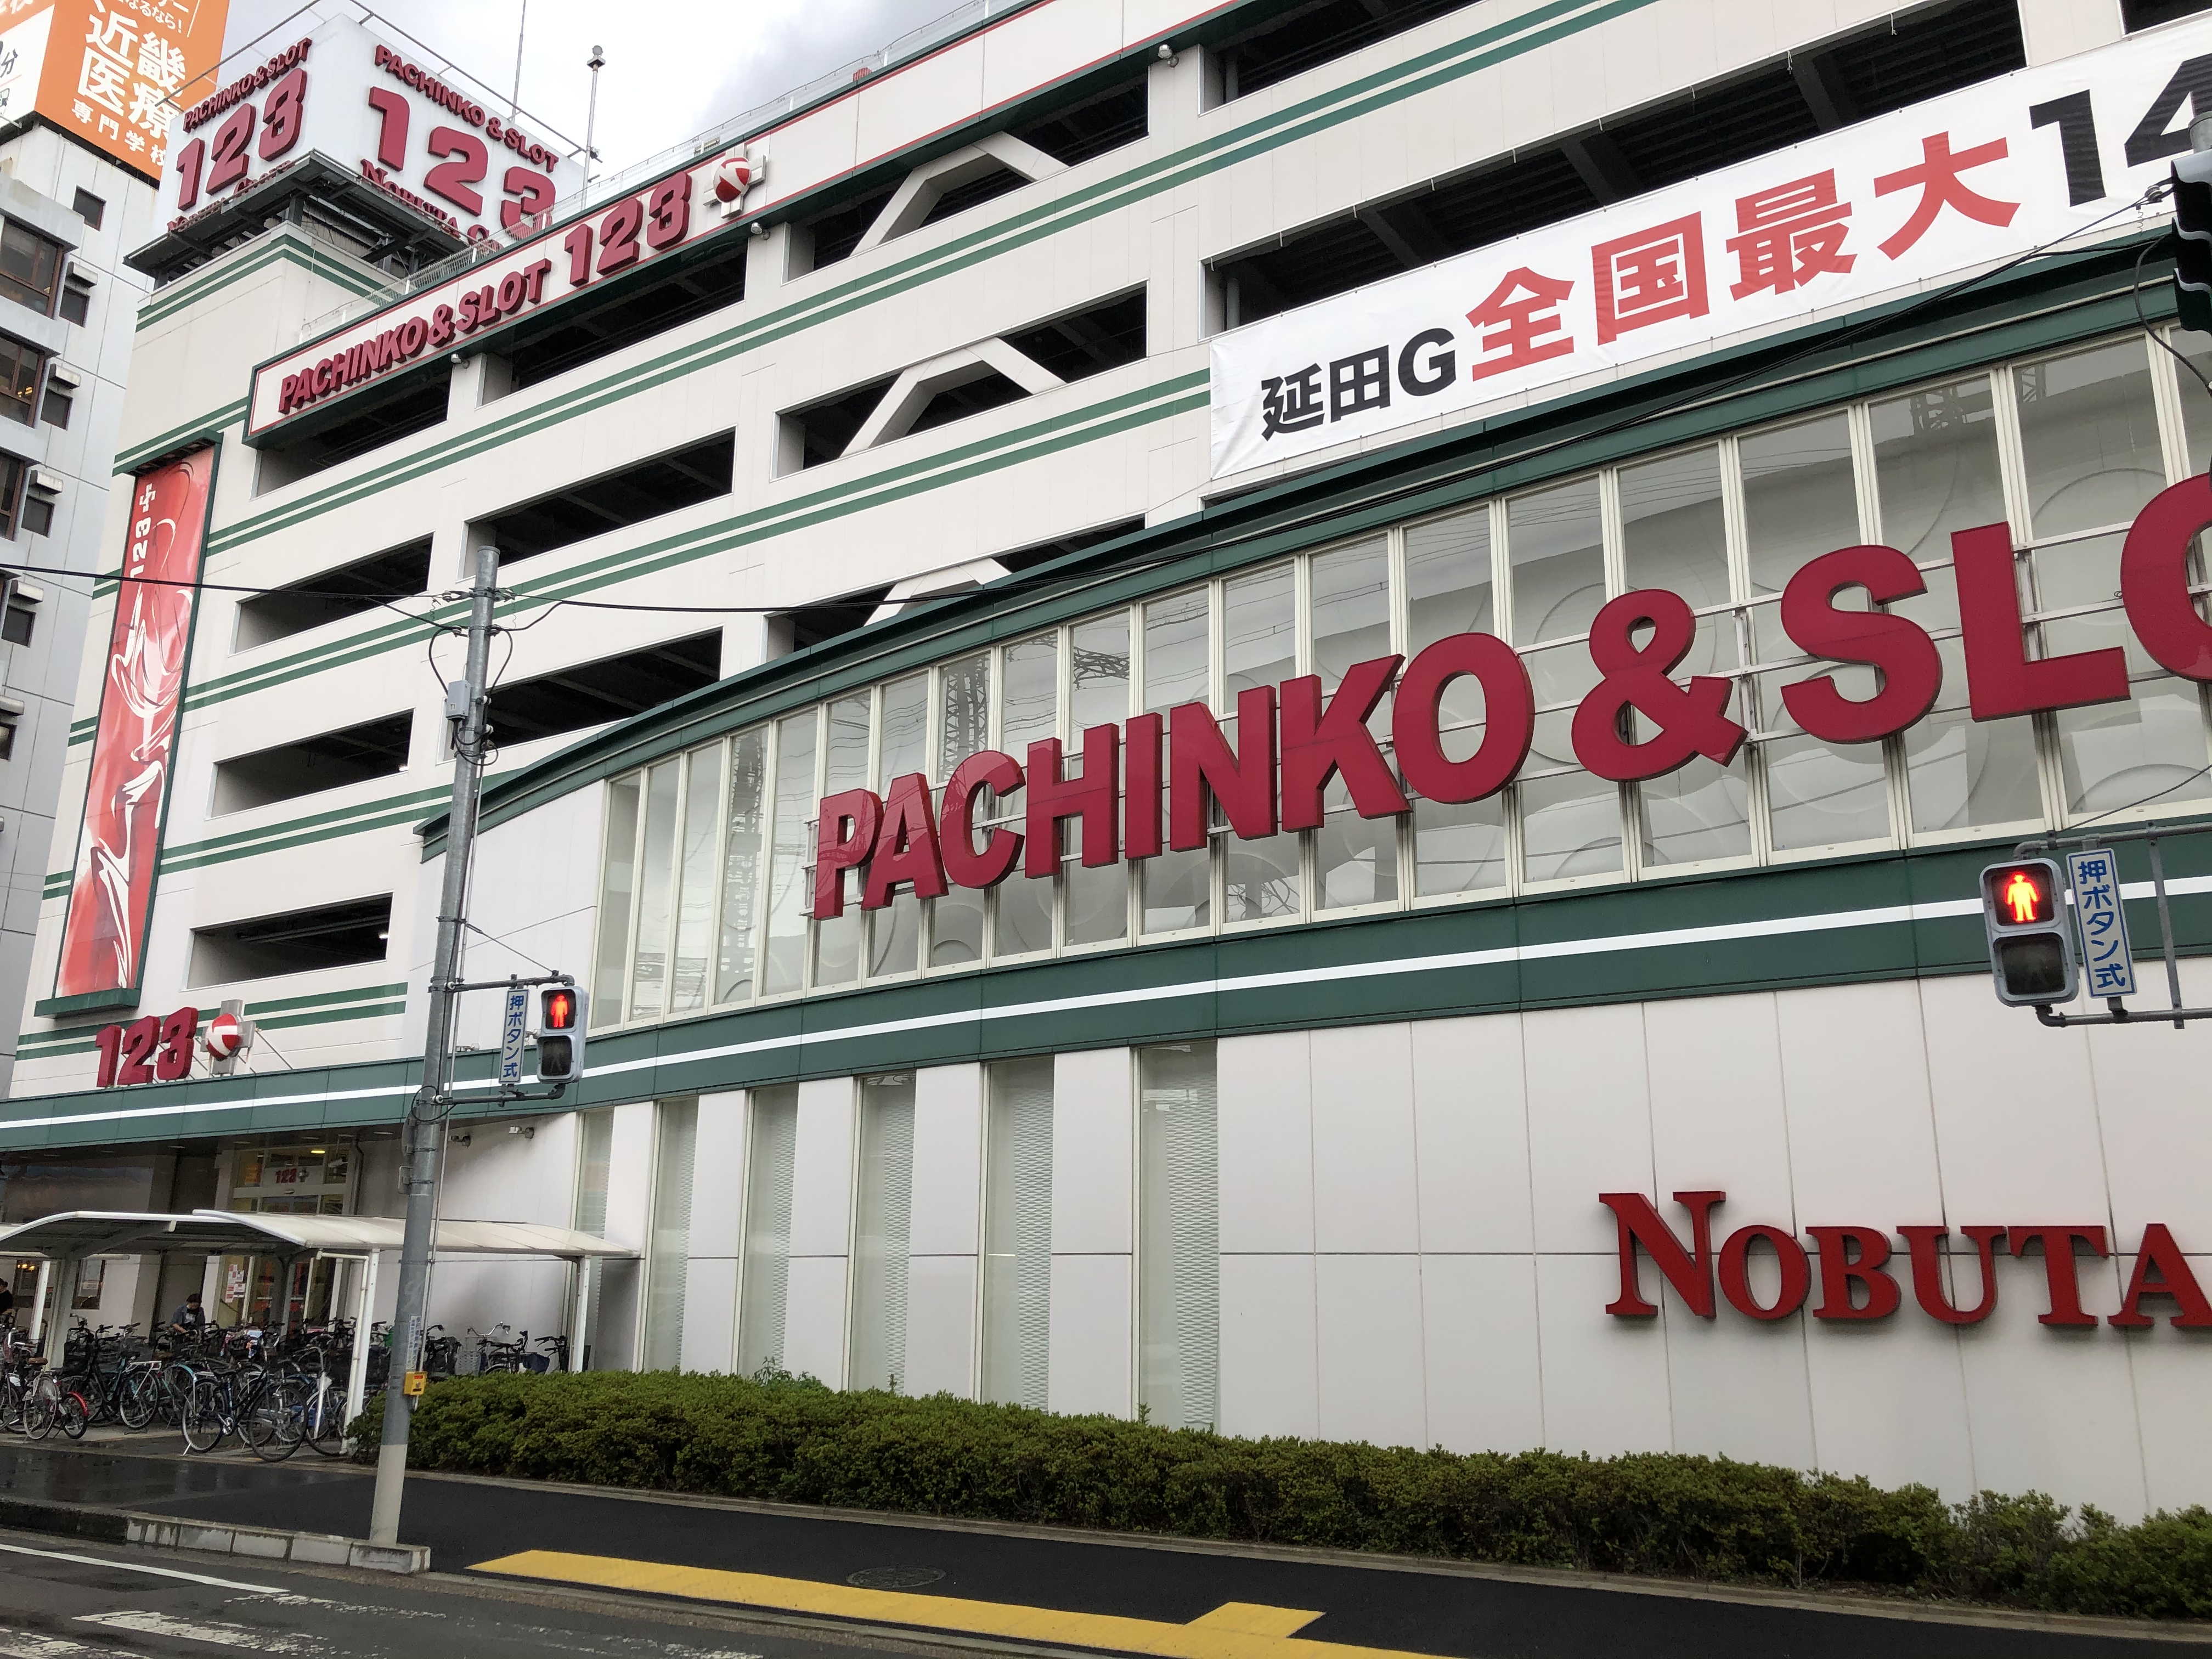 Number of pachinko parlors in Japan decreasing rapidly, down 12 percent in two years